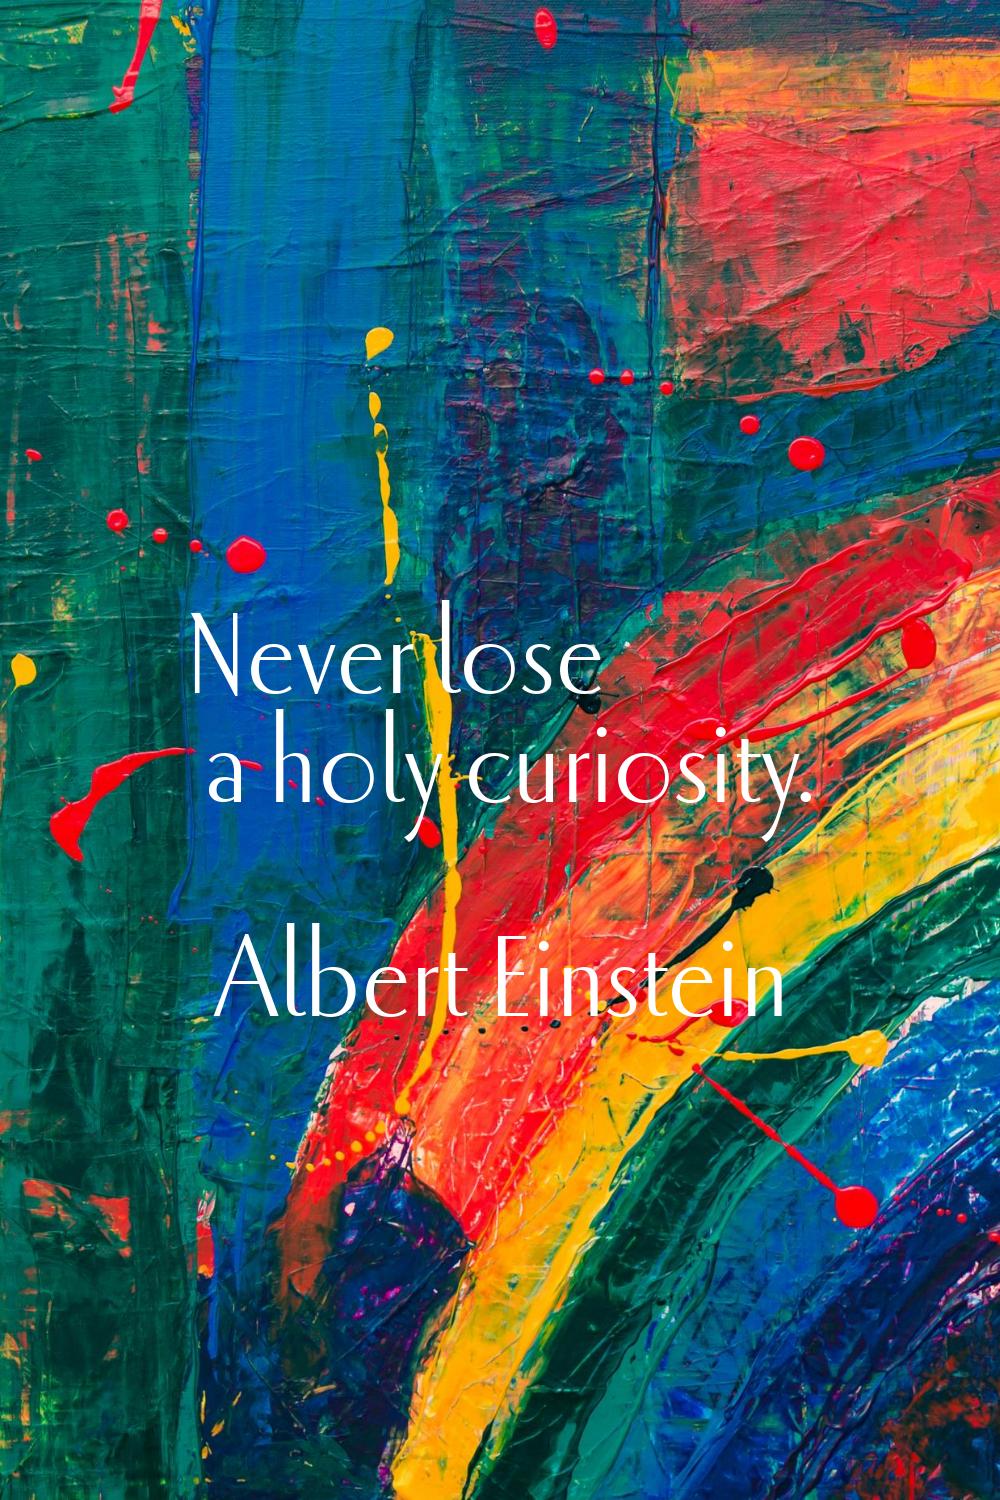 Never lose a holy curiosity.